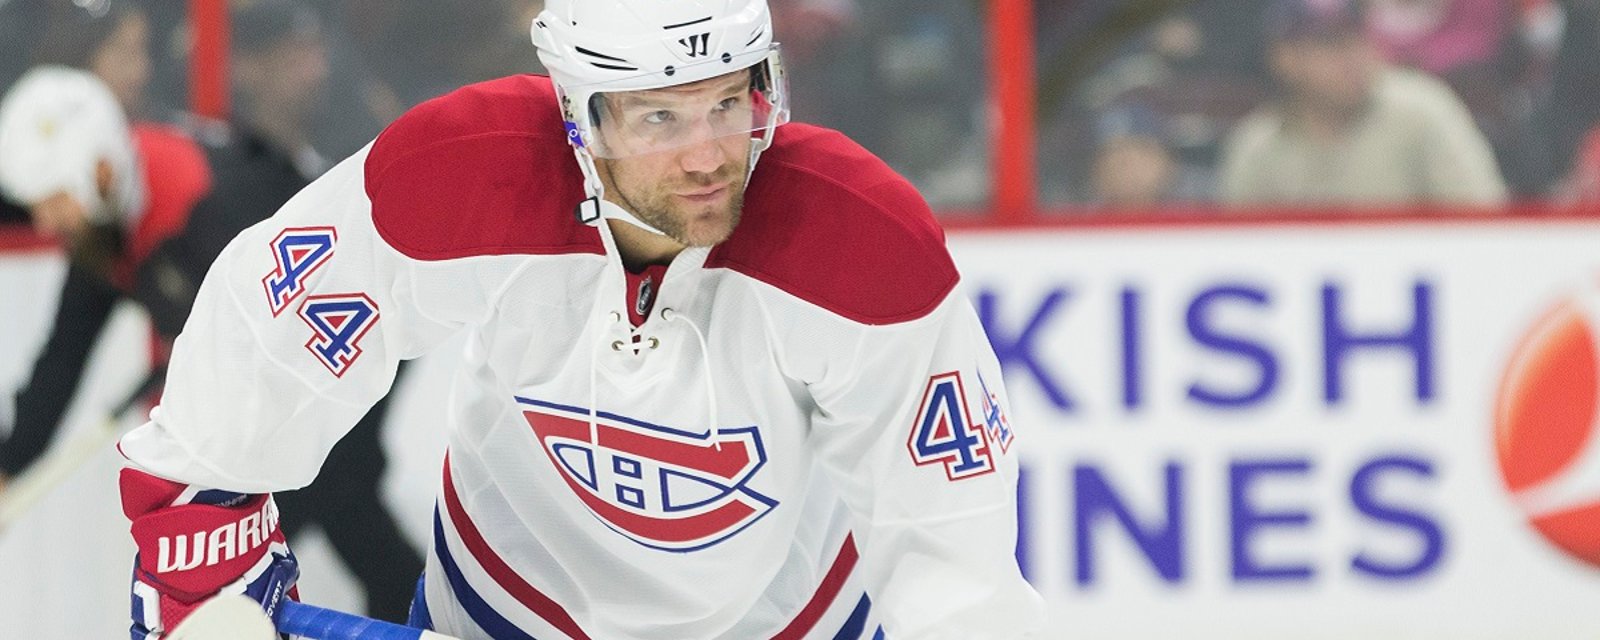 Report: Former Habs forward will join Rangers on a tryout.